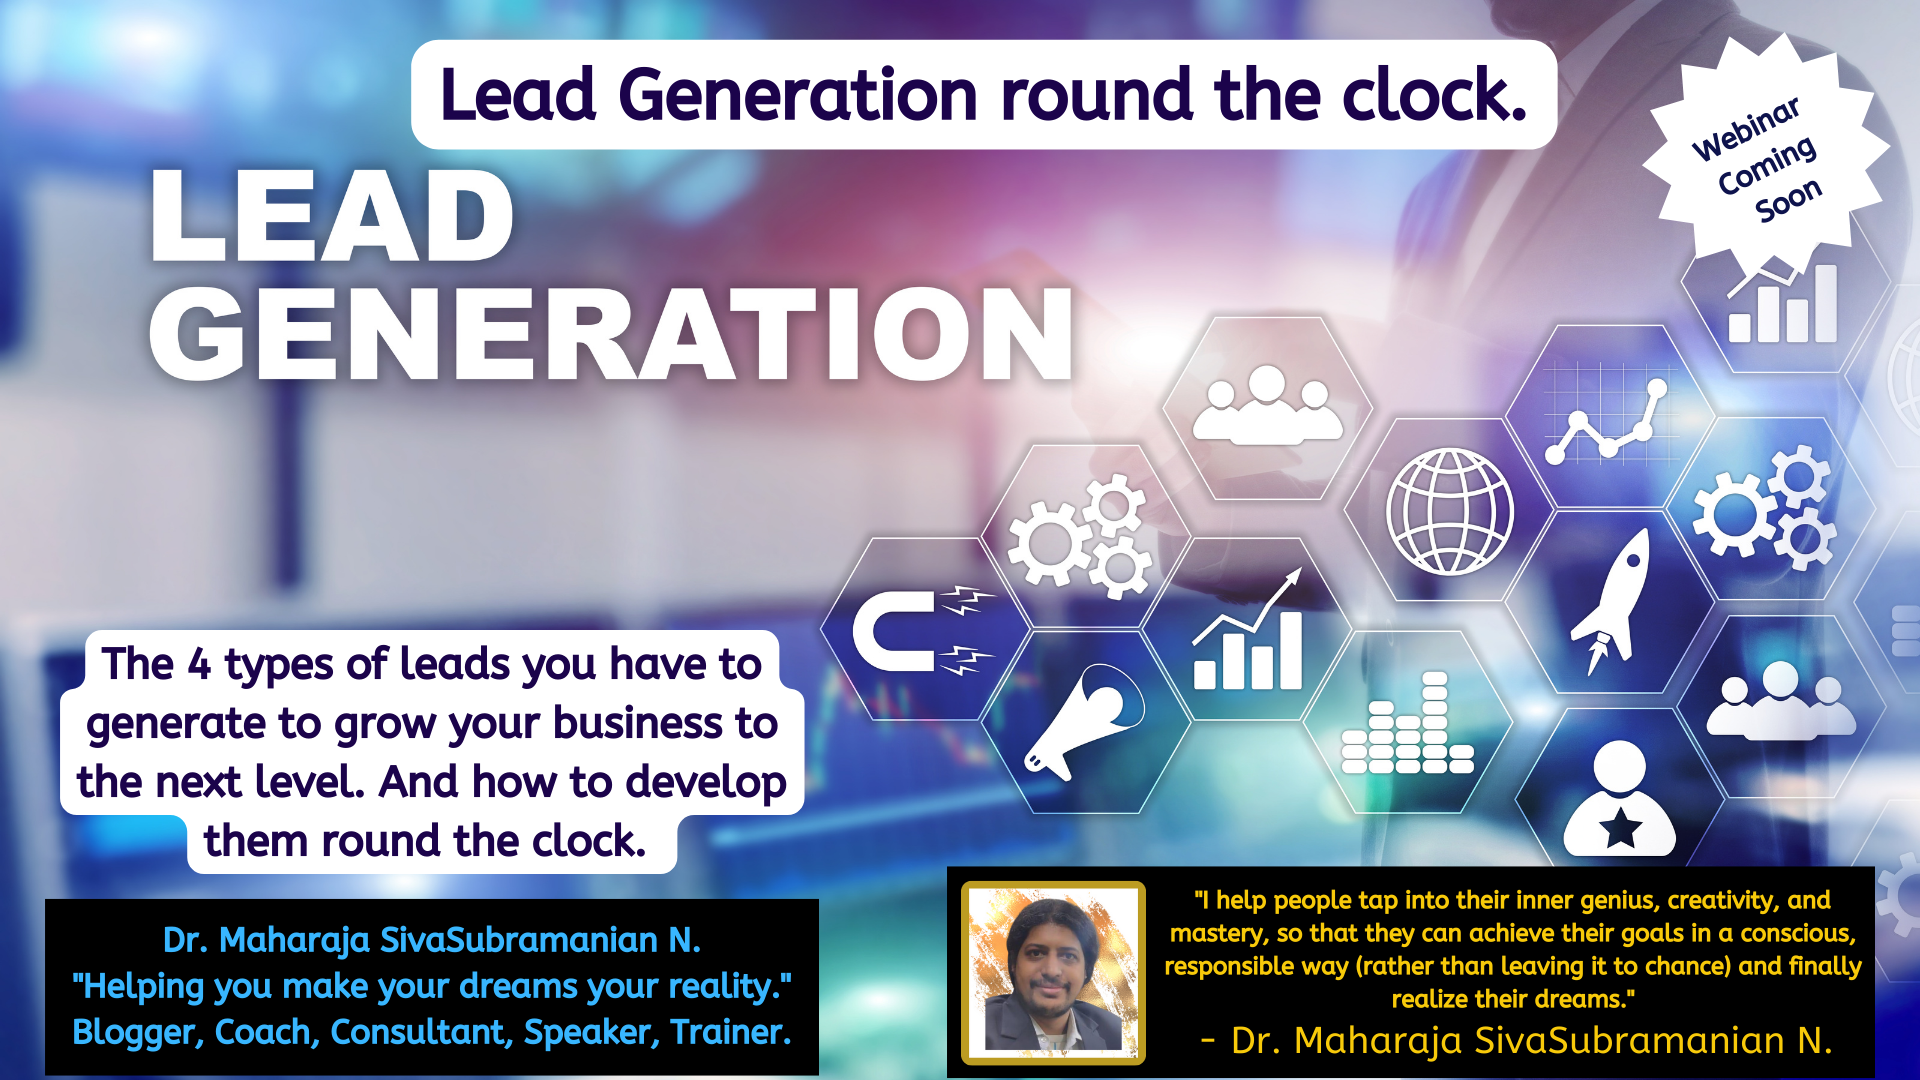 Lead Generation round the clock for online course creators. – Upcoming free webinar.